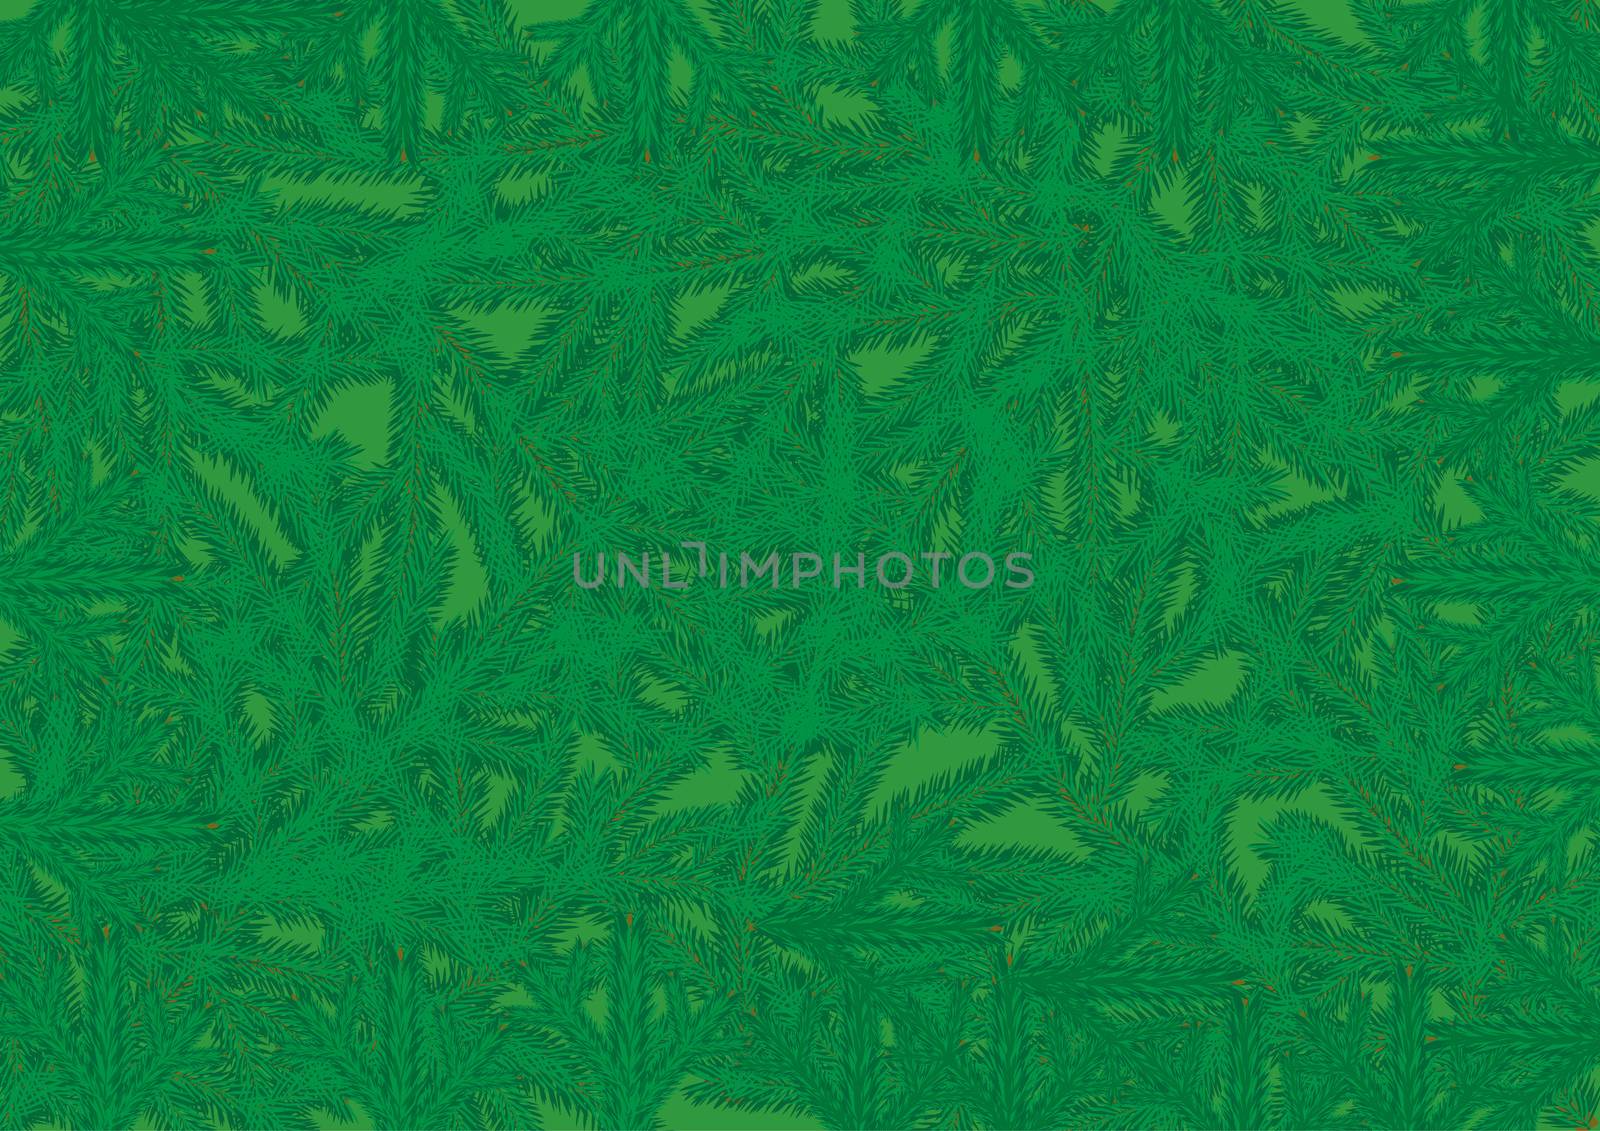 Background of Coniferous Tree Branches by illustratorCZ